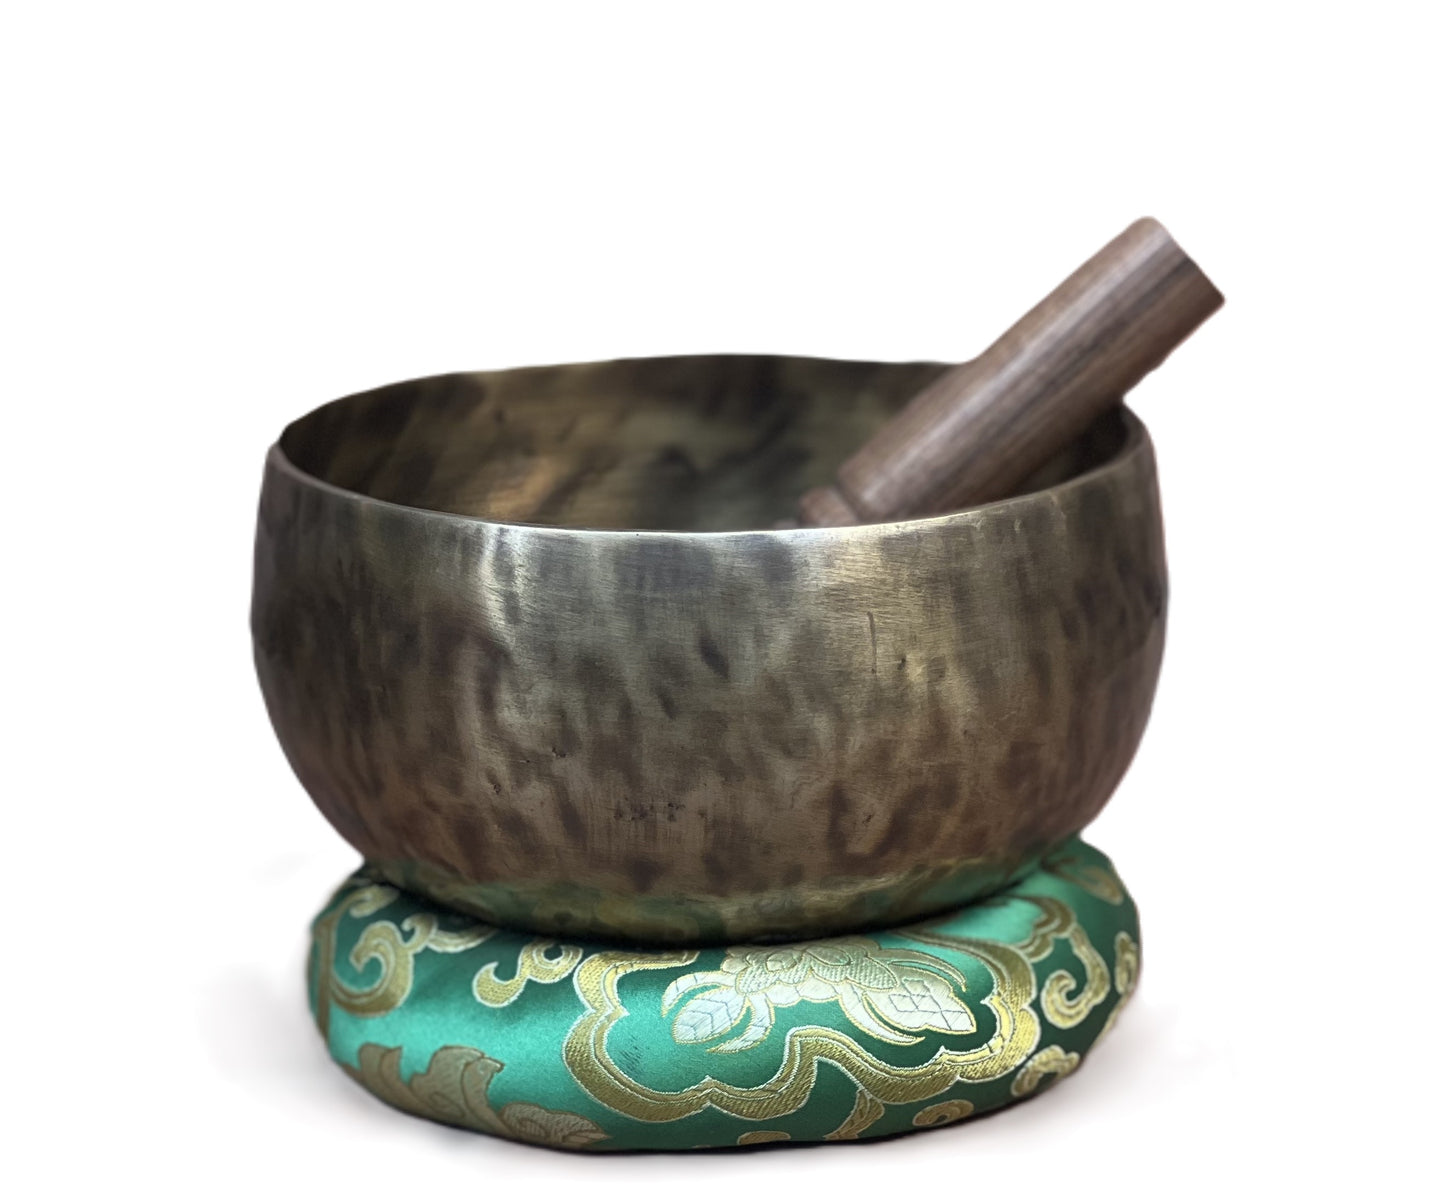 HAND-HAMMERED/ HANDMADE SMALL TIBETAN SINGING BOWL FROM NEPAL SUPPLIED WITH FREE CUSHION AND MALLET